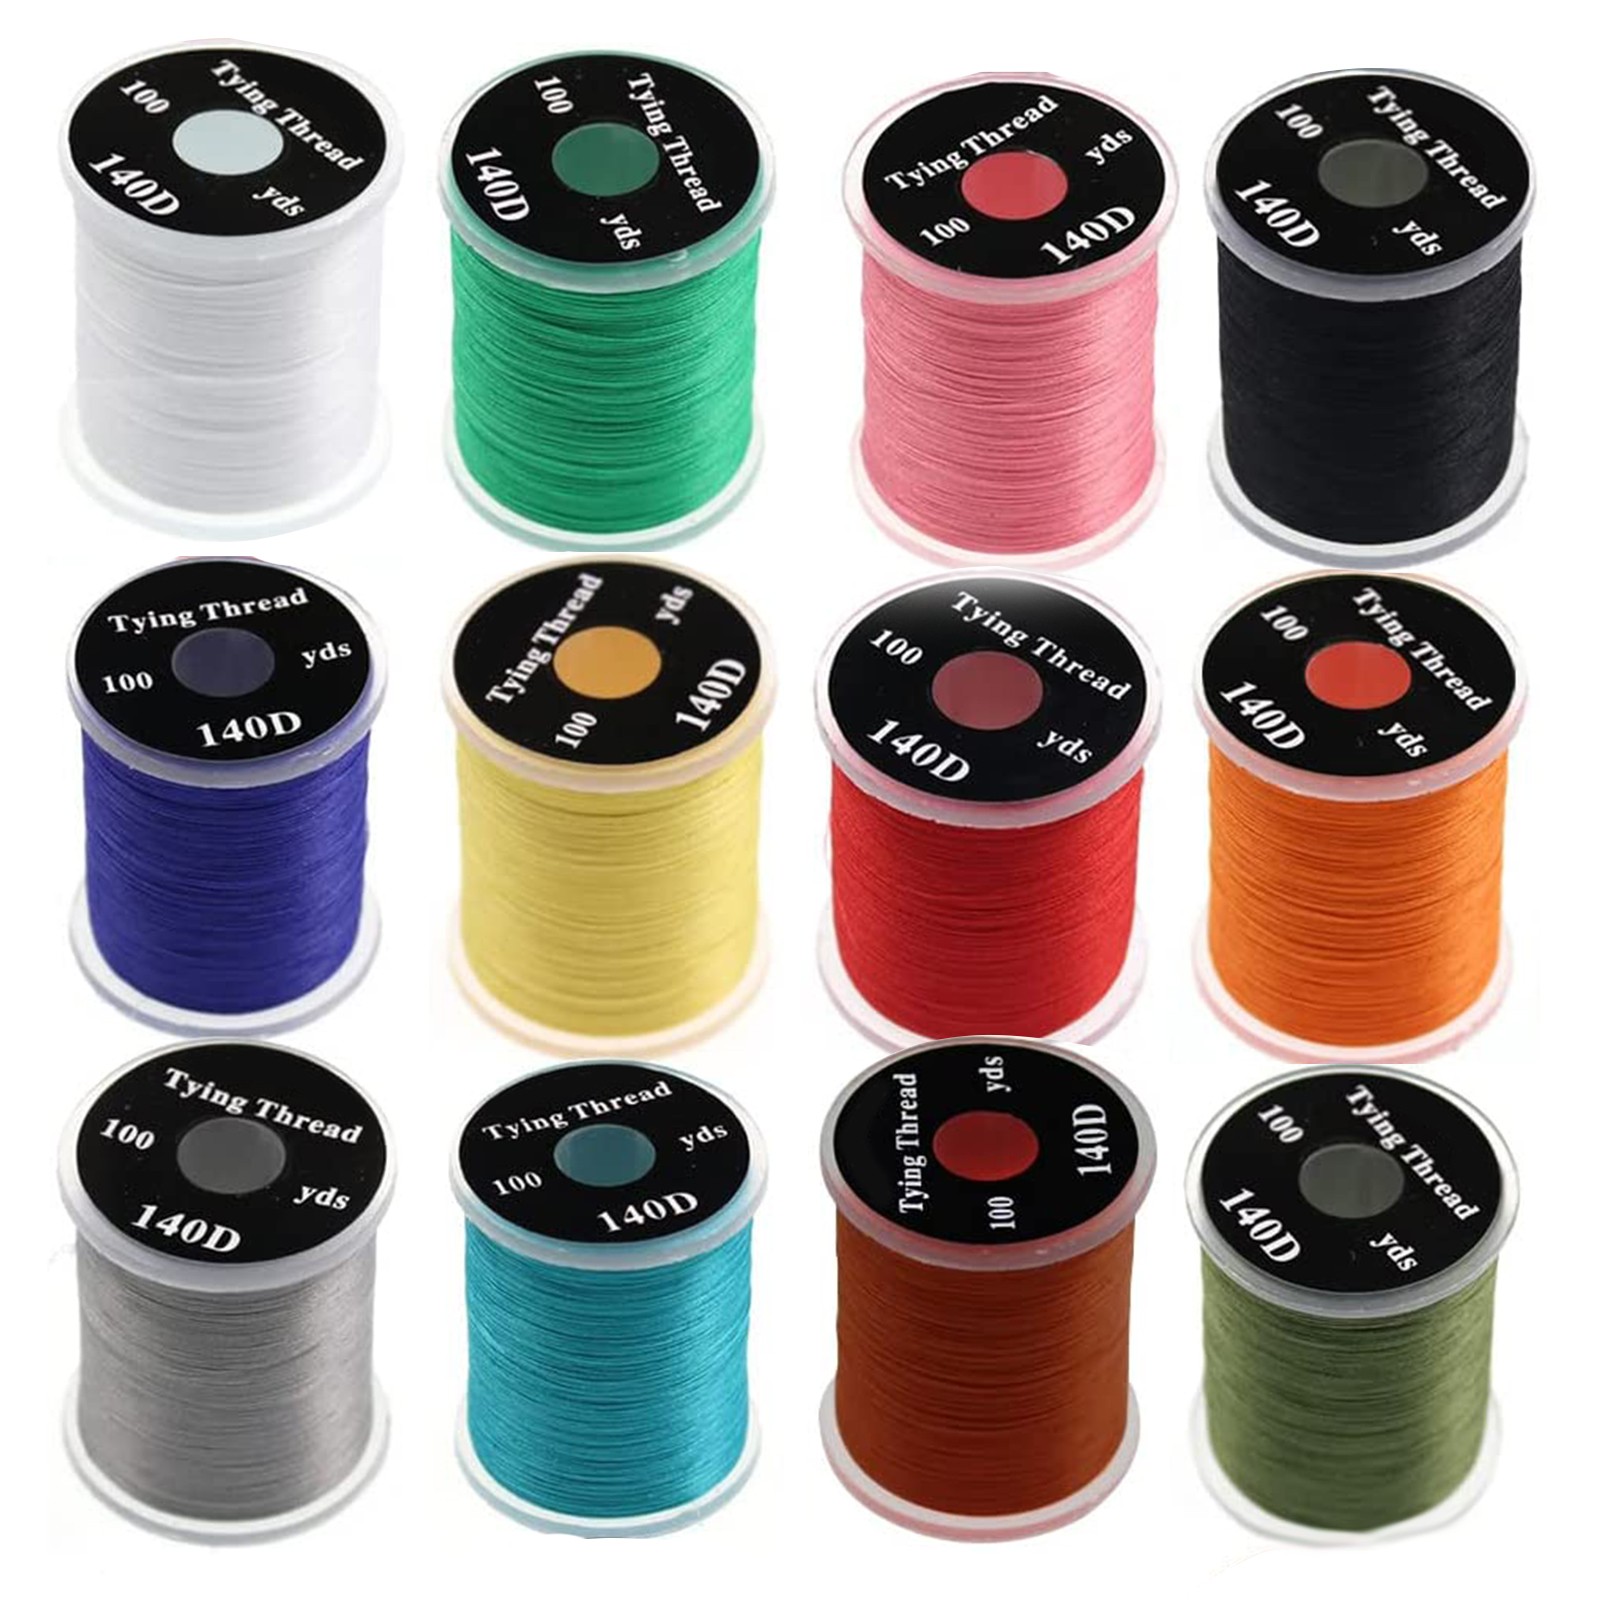 High Quality 140D Fly Tying Thread Kit Enhance your Fly Fishing Success